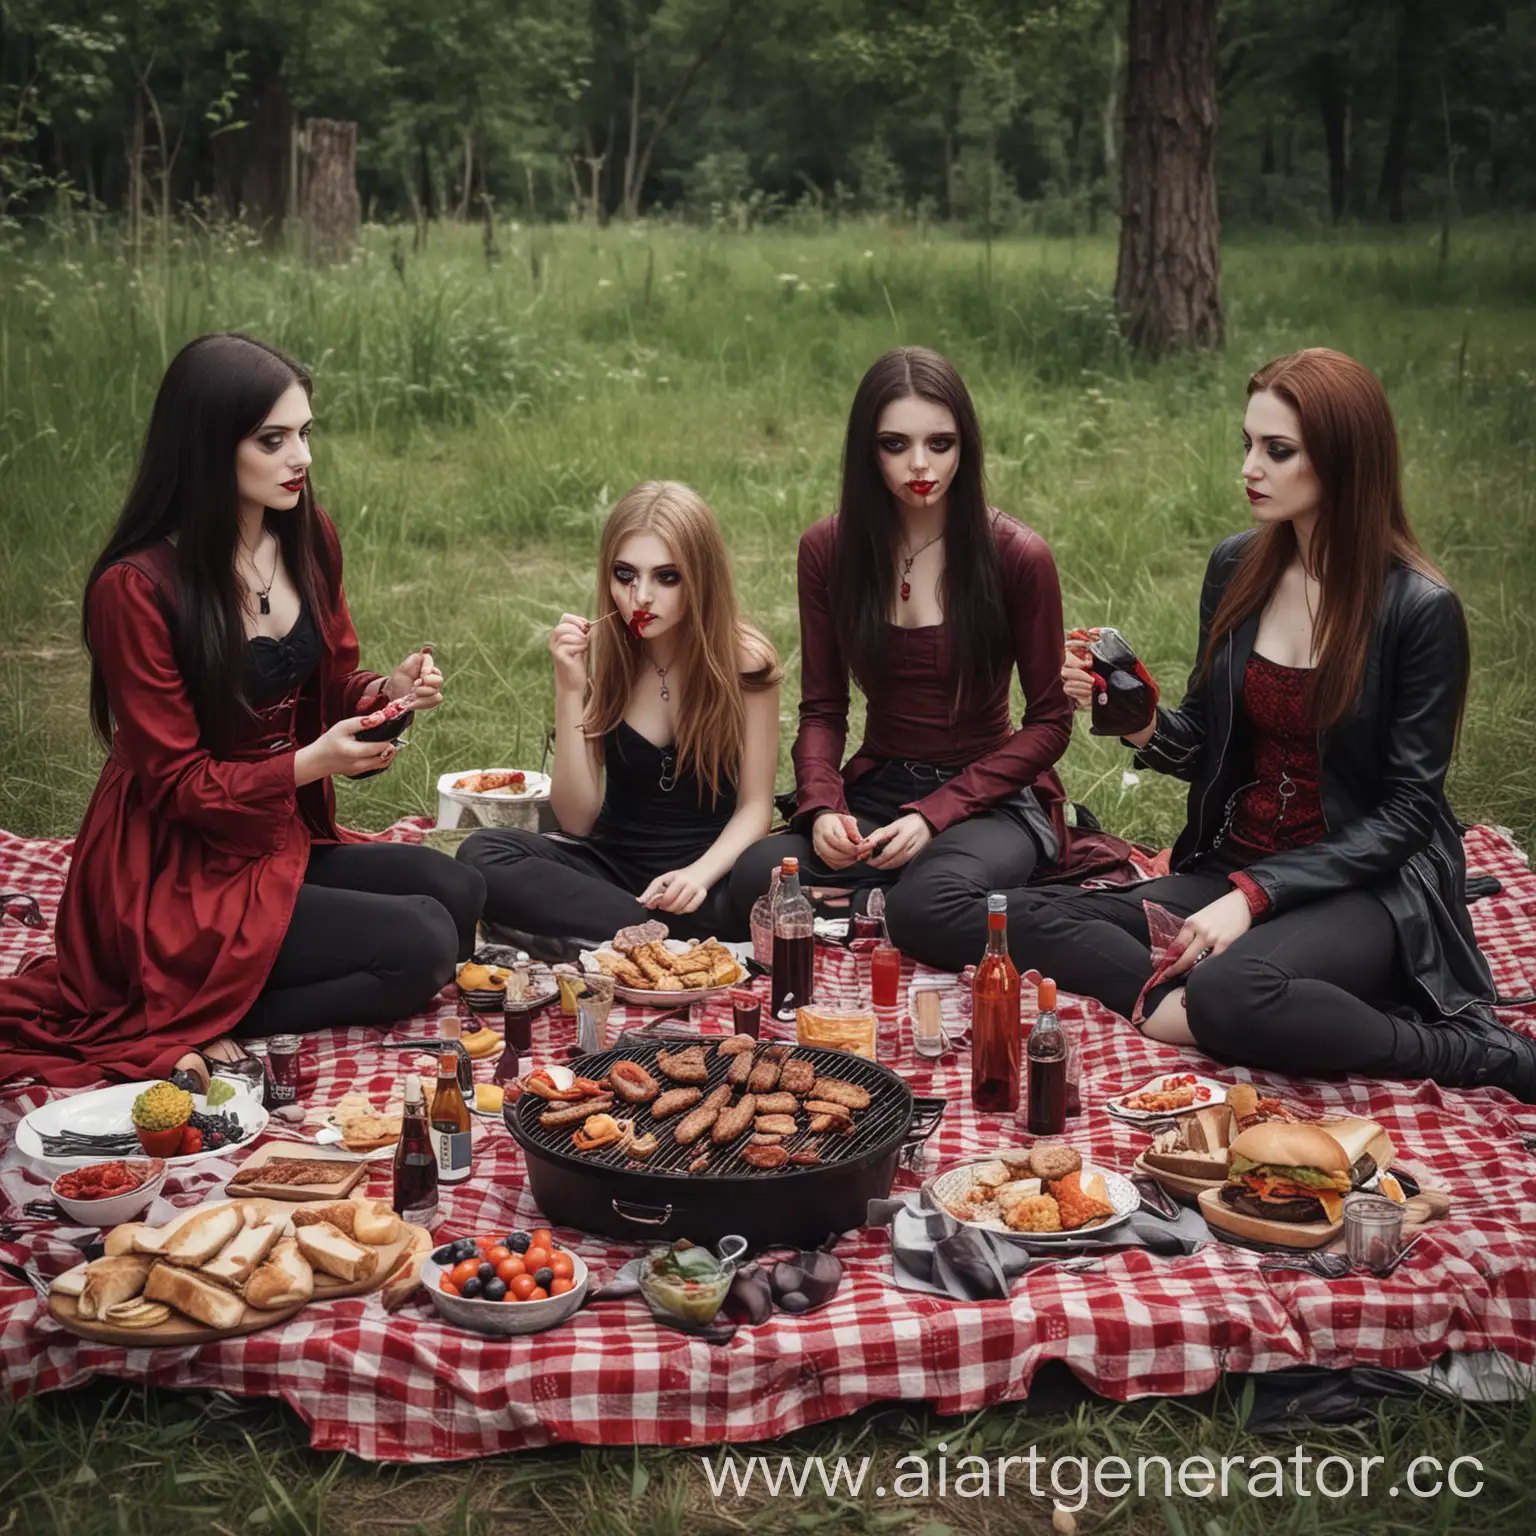 Vampire-Barbecue-A-Relaxing-Picnic-with-the-Undead